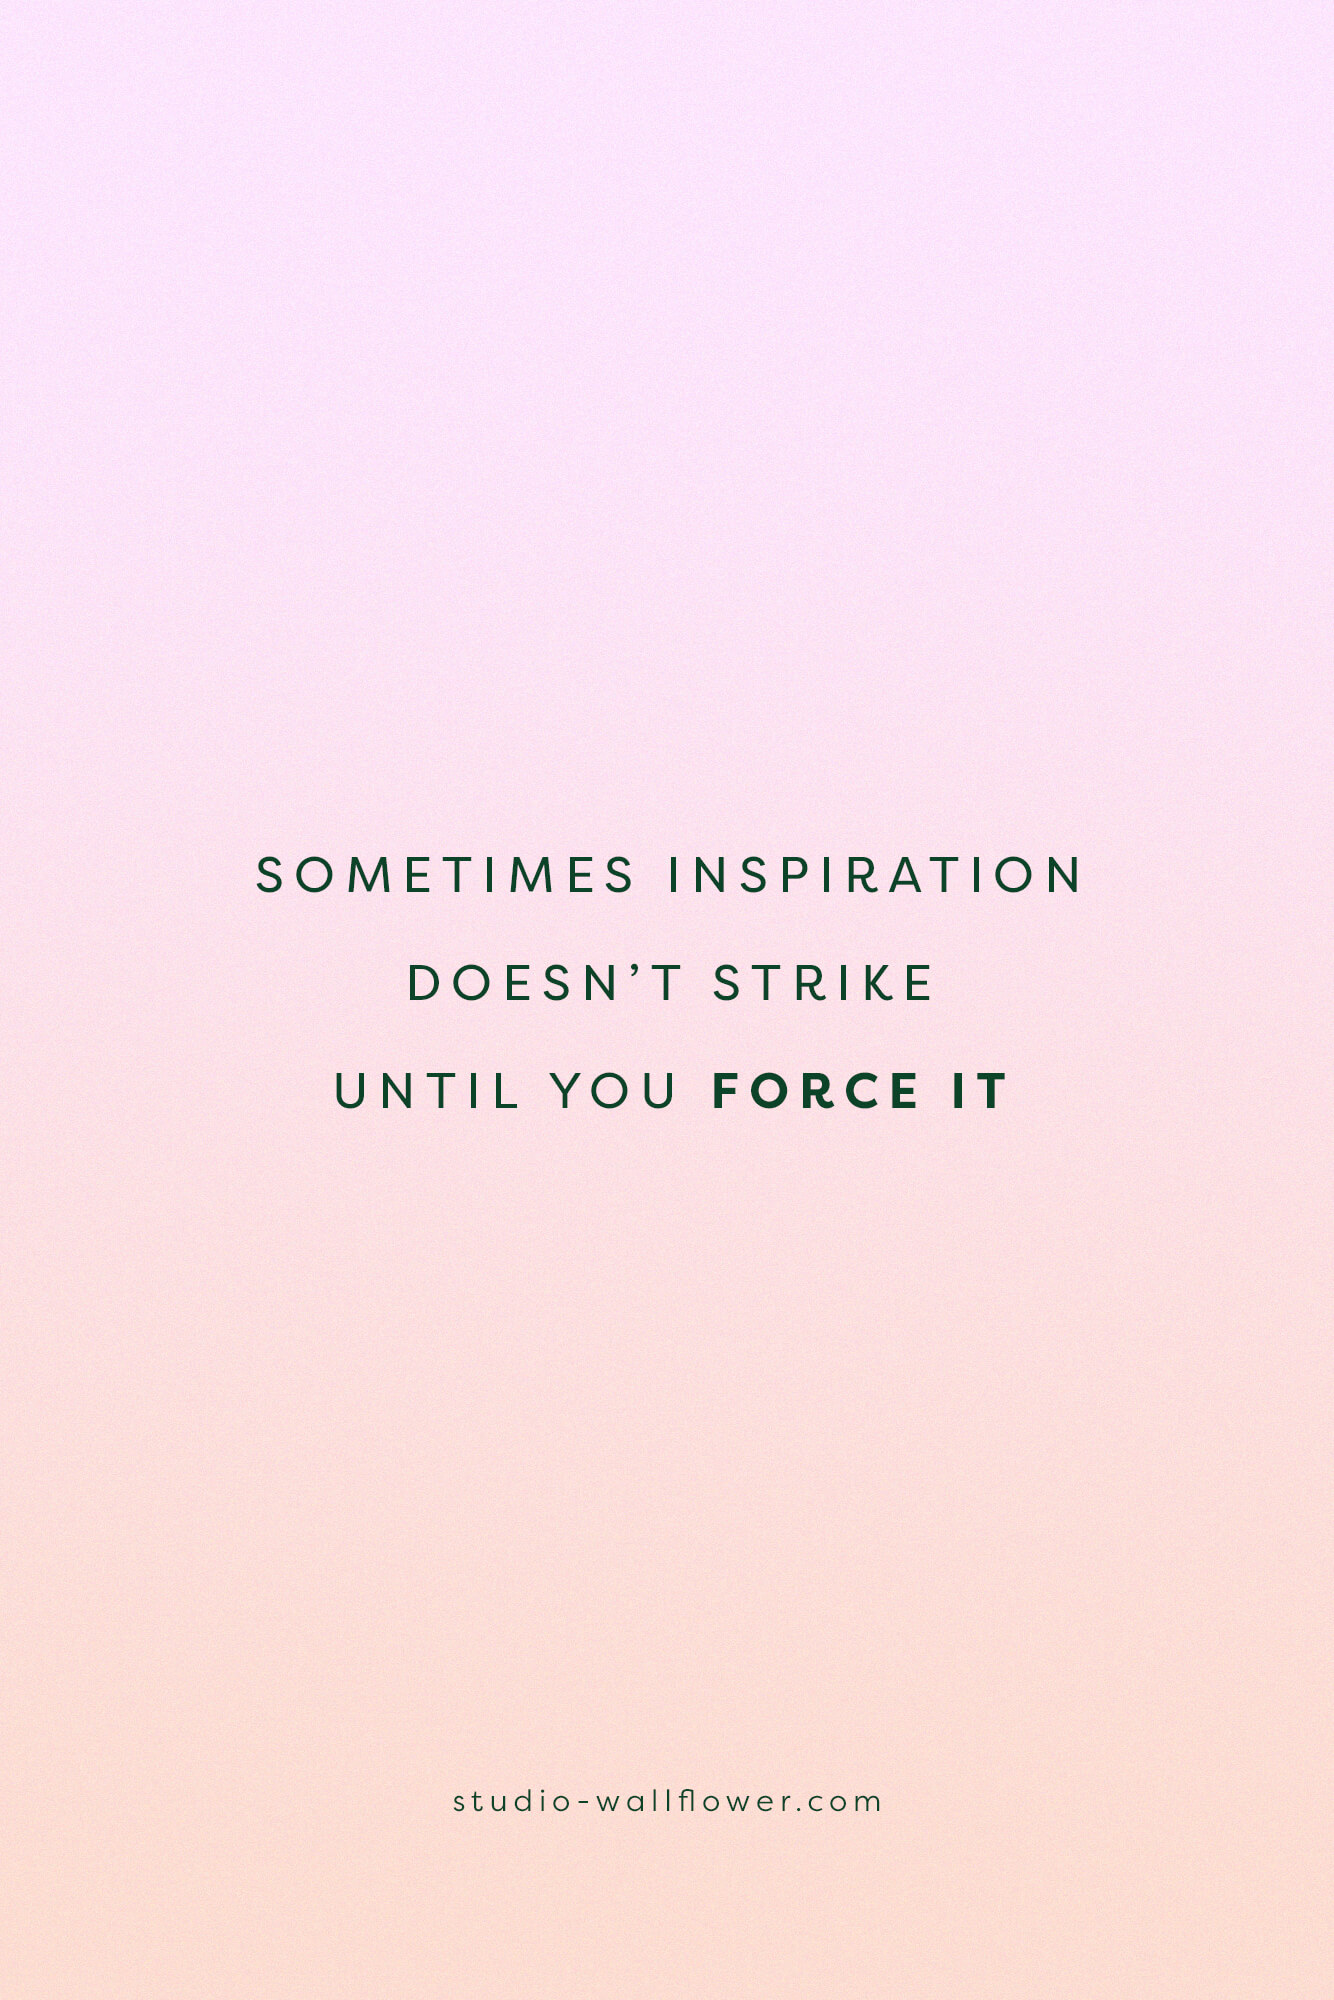 How To Force Inspiration (And Why You Have To)